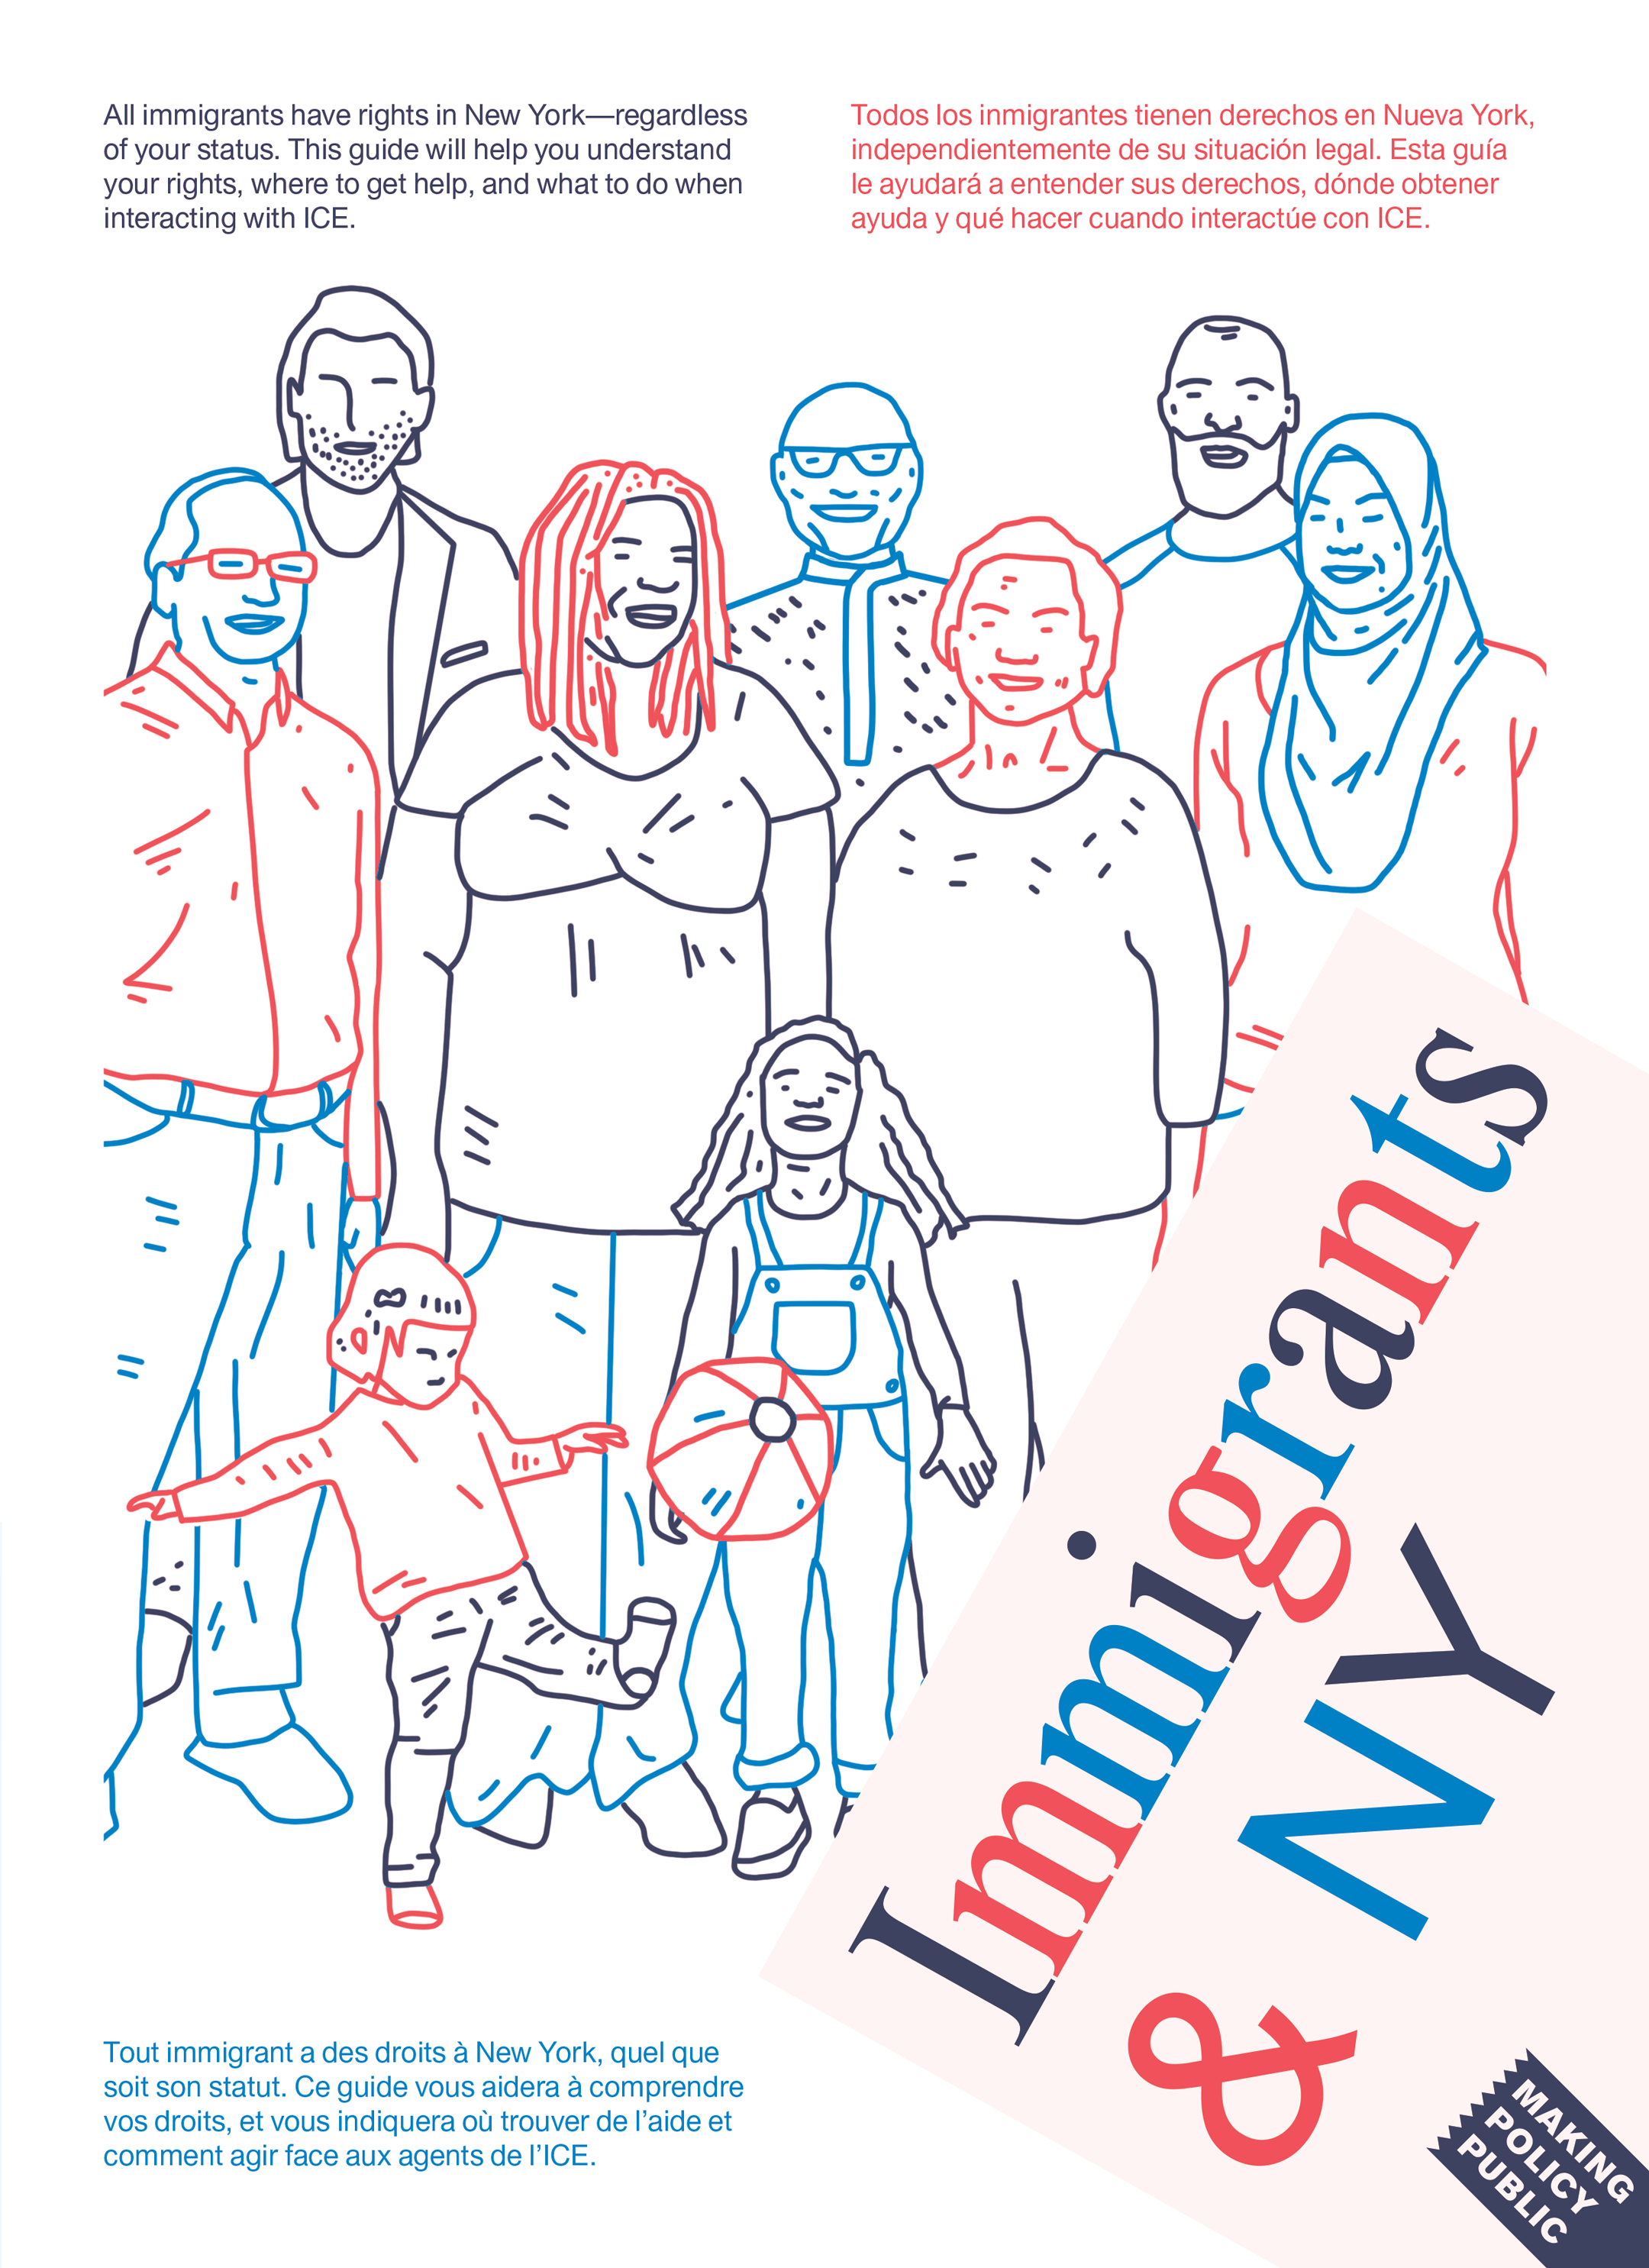 The front page of a blue and red color pamphlet with the title "Immigrants & NY" printed boldly across the cover. There are line drawings of a diverse group of people and a short paragraph in both English and Spanish starting with “All immigrants have rights in New York”.